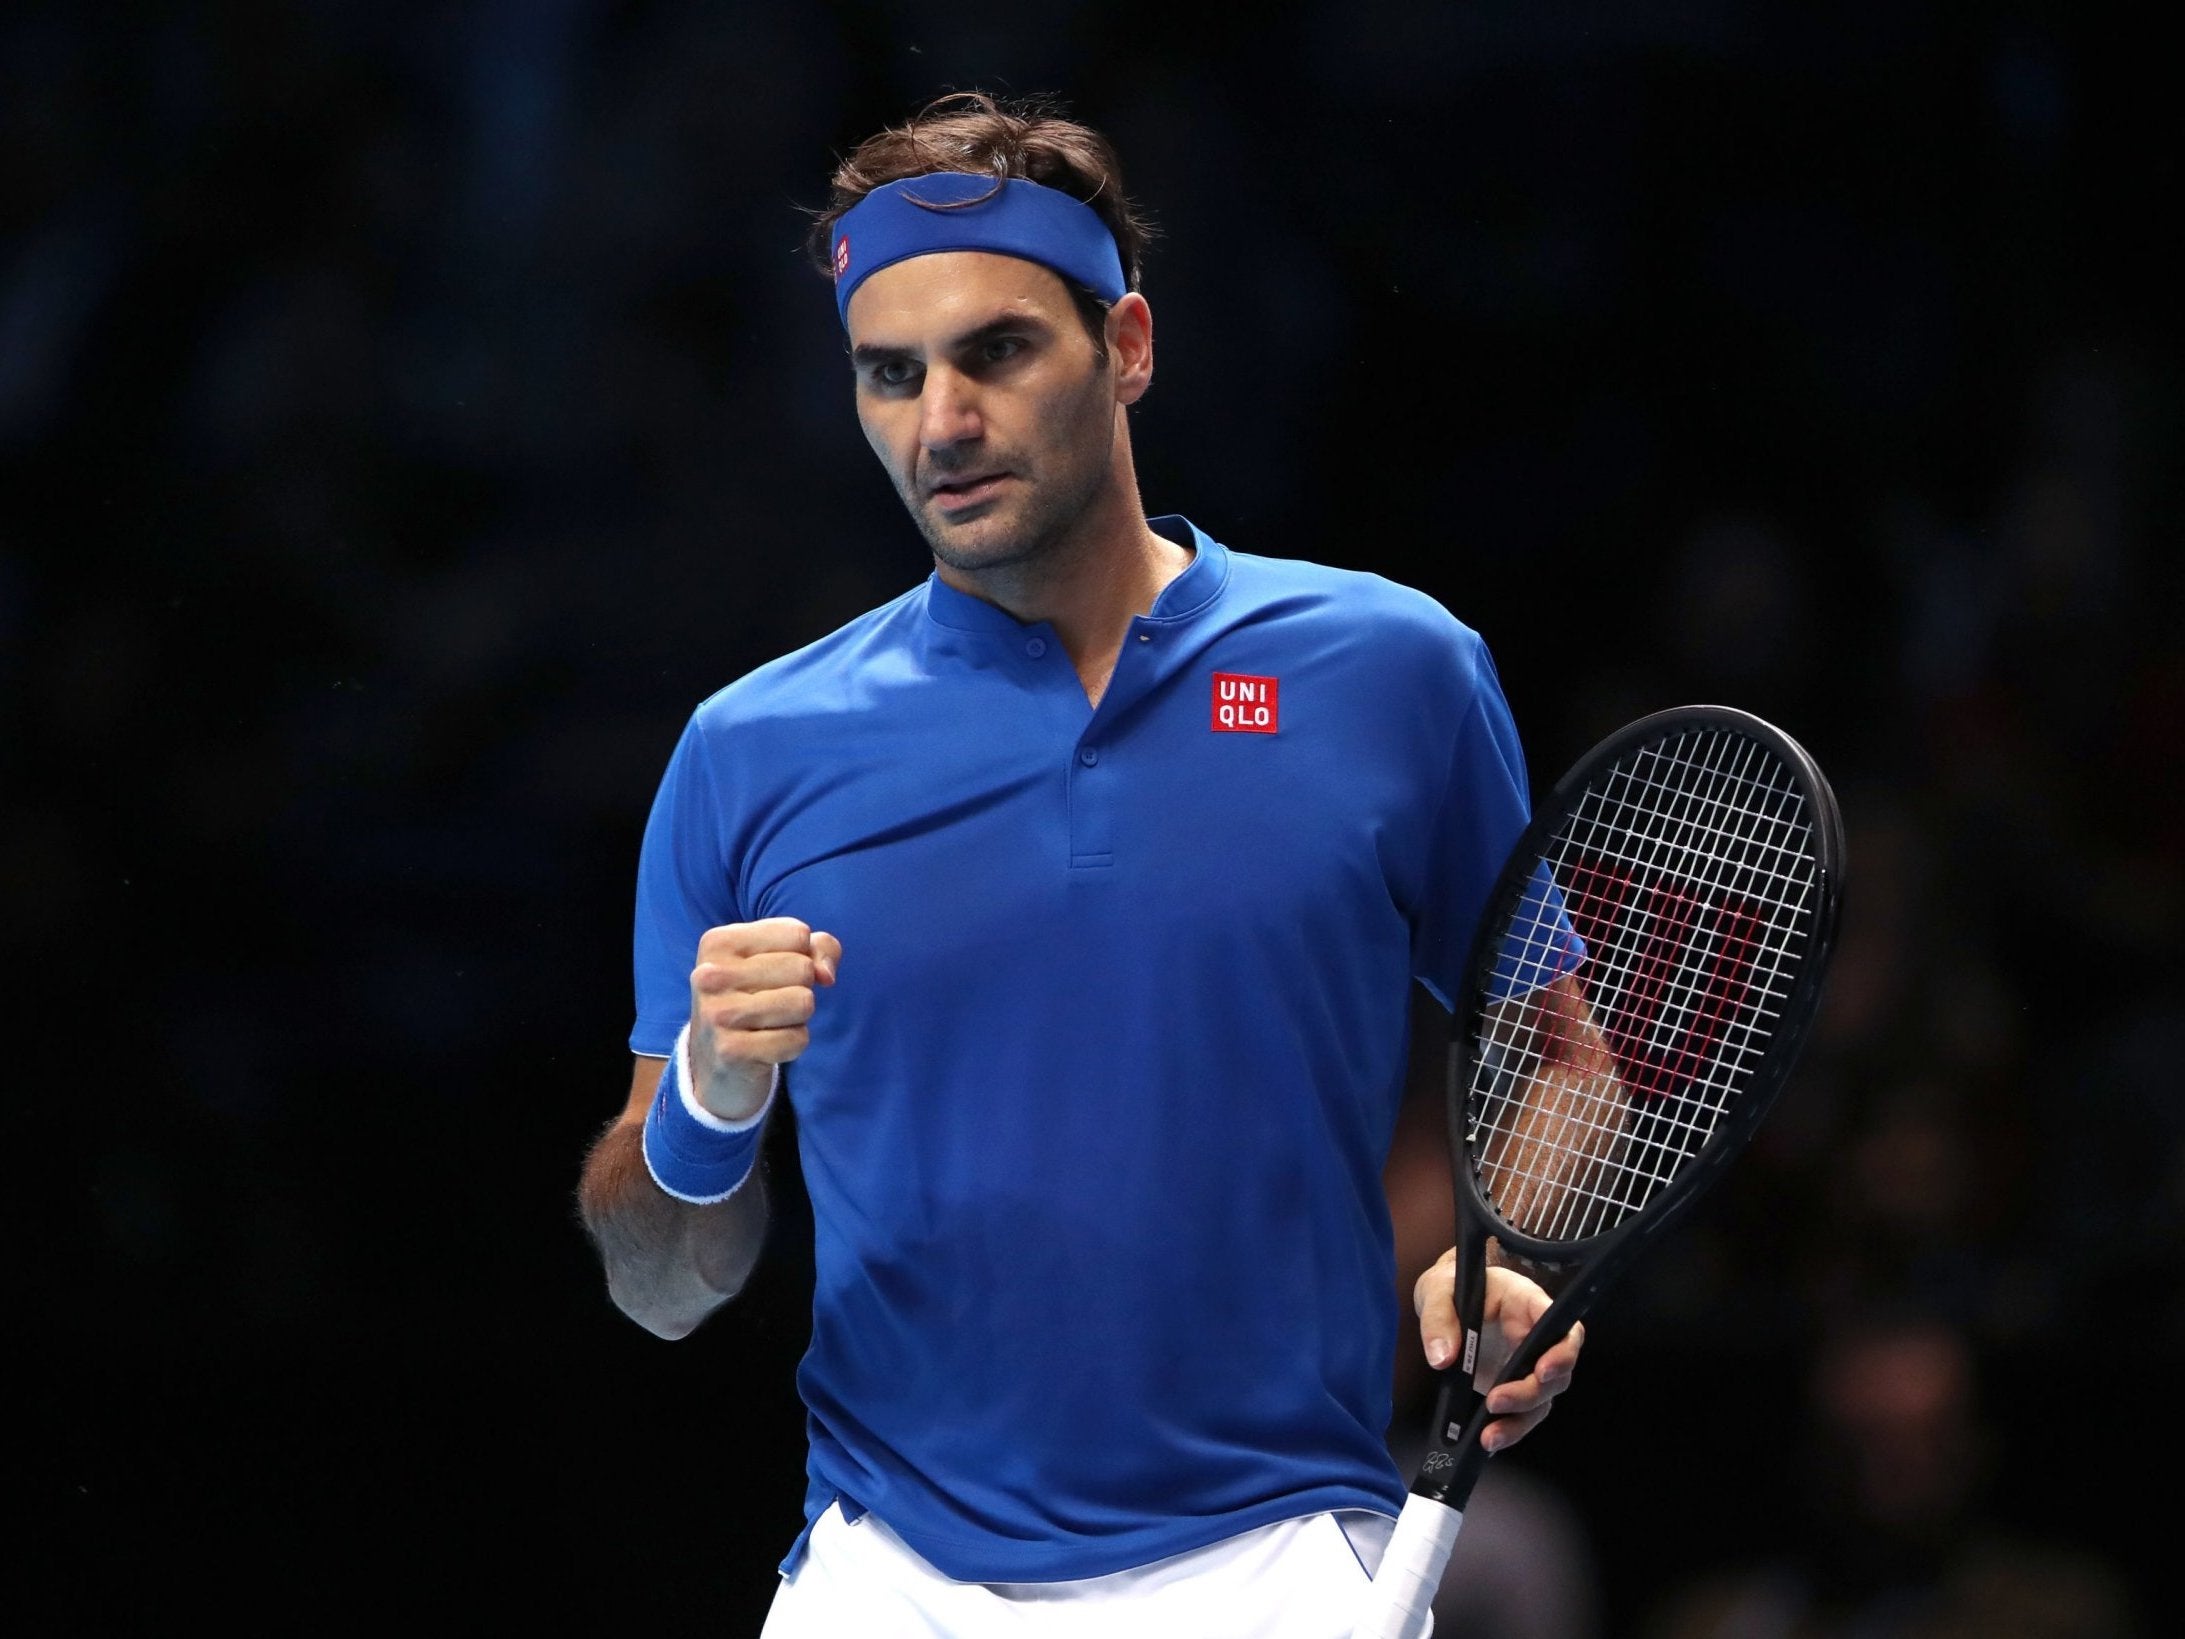 Federer is into the final four in London